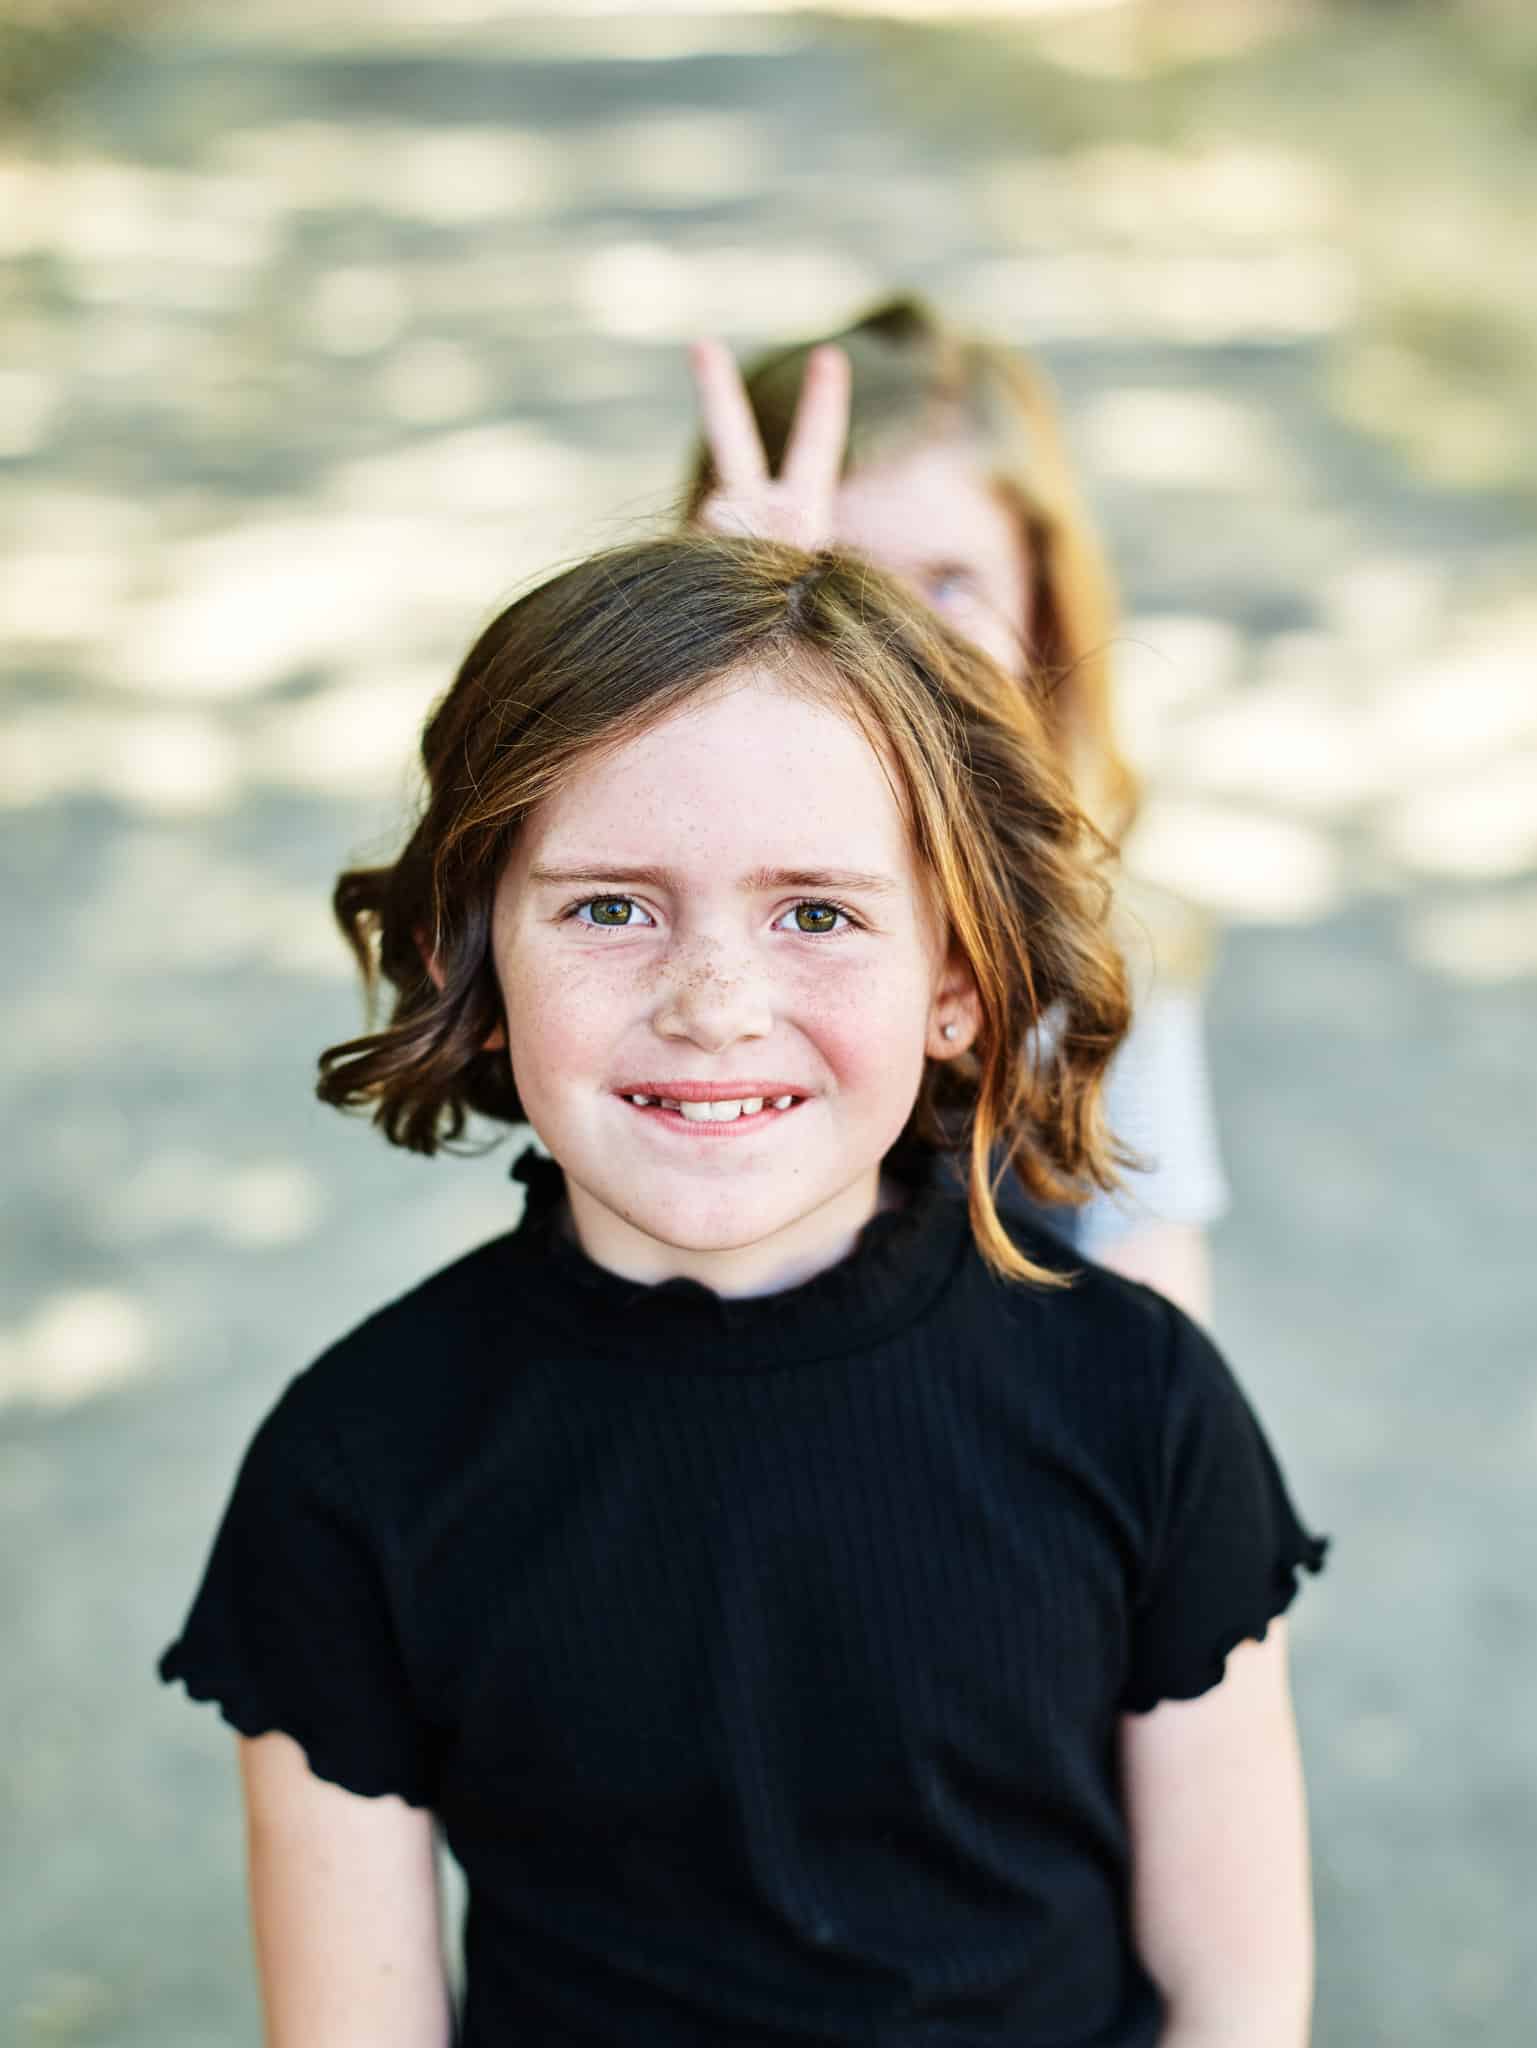 funny photo of girl getting bunny ears from sister